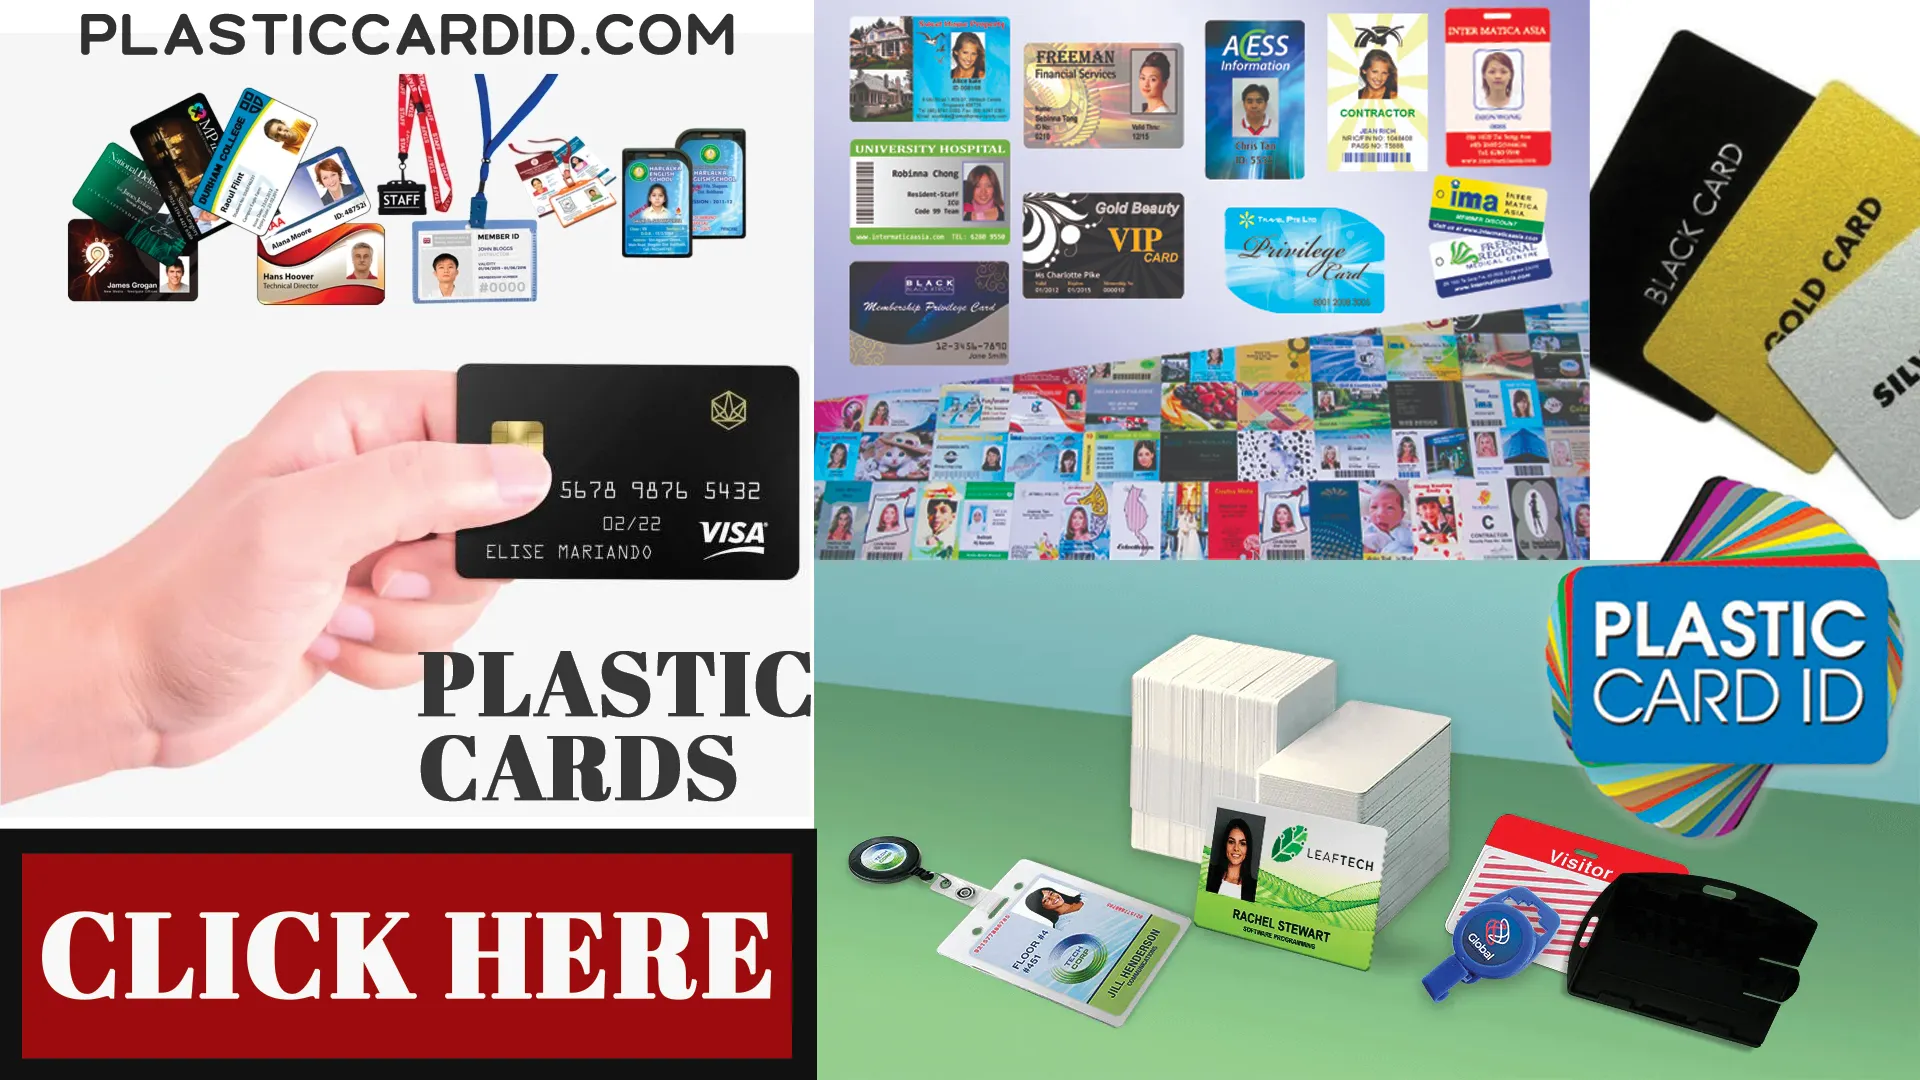 Putting Biodegradable Plastic Cards to Work